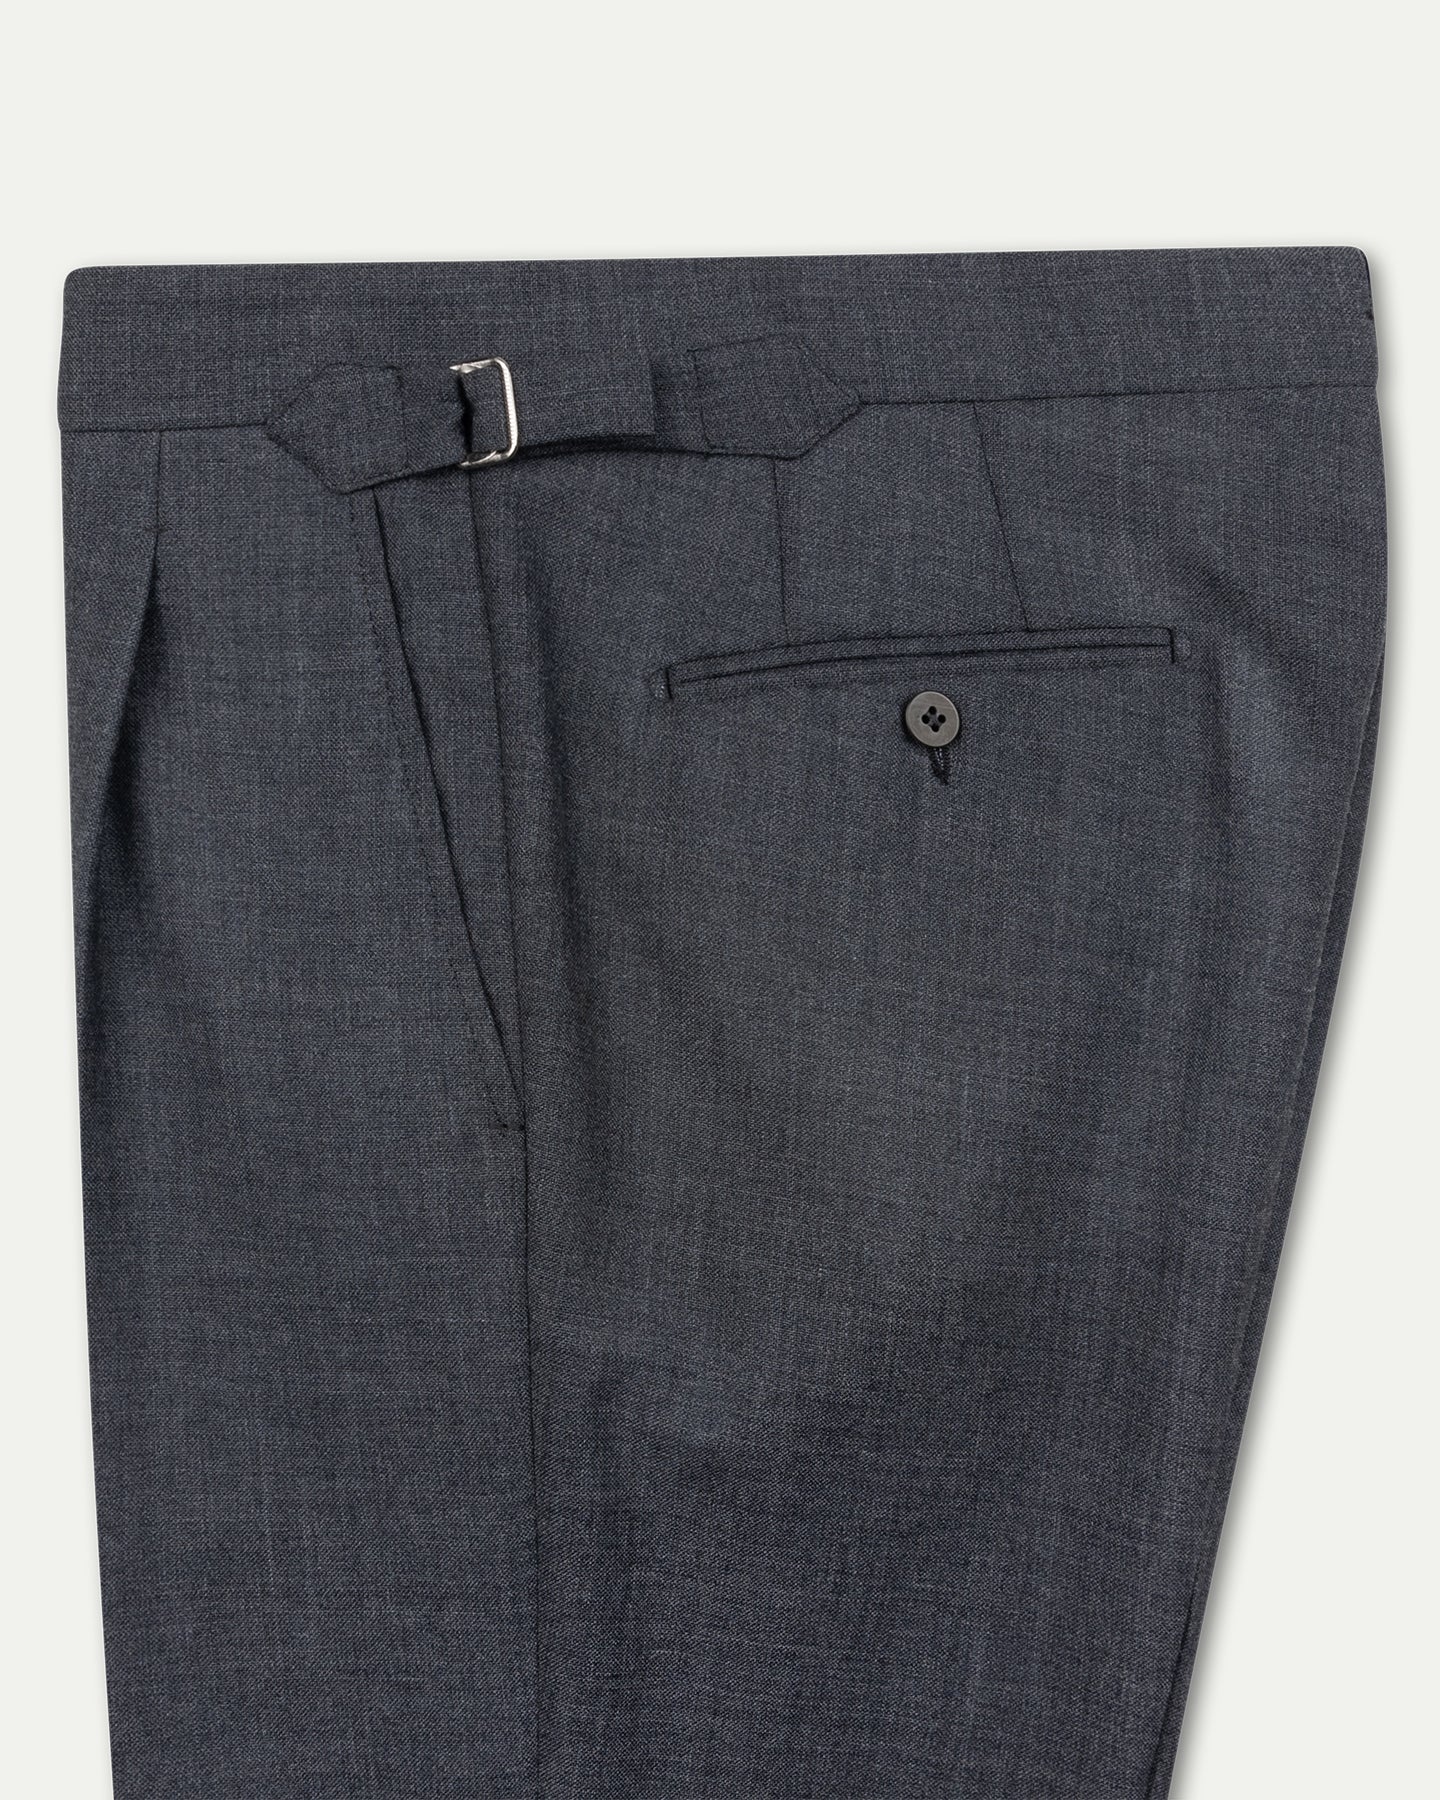 Made-To-Order Trousers in Mid Grey Fresco